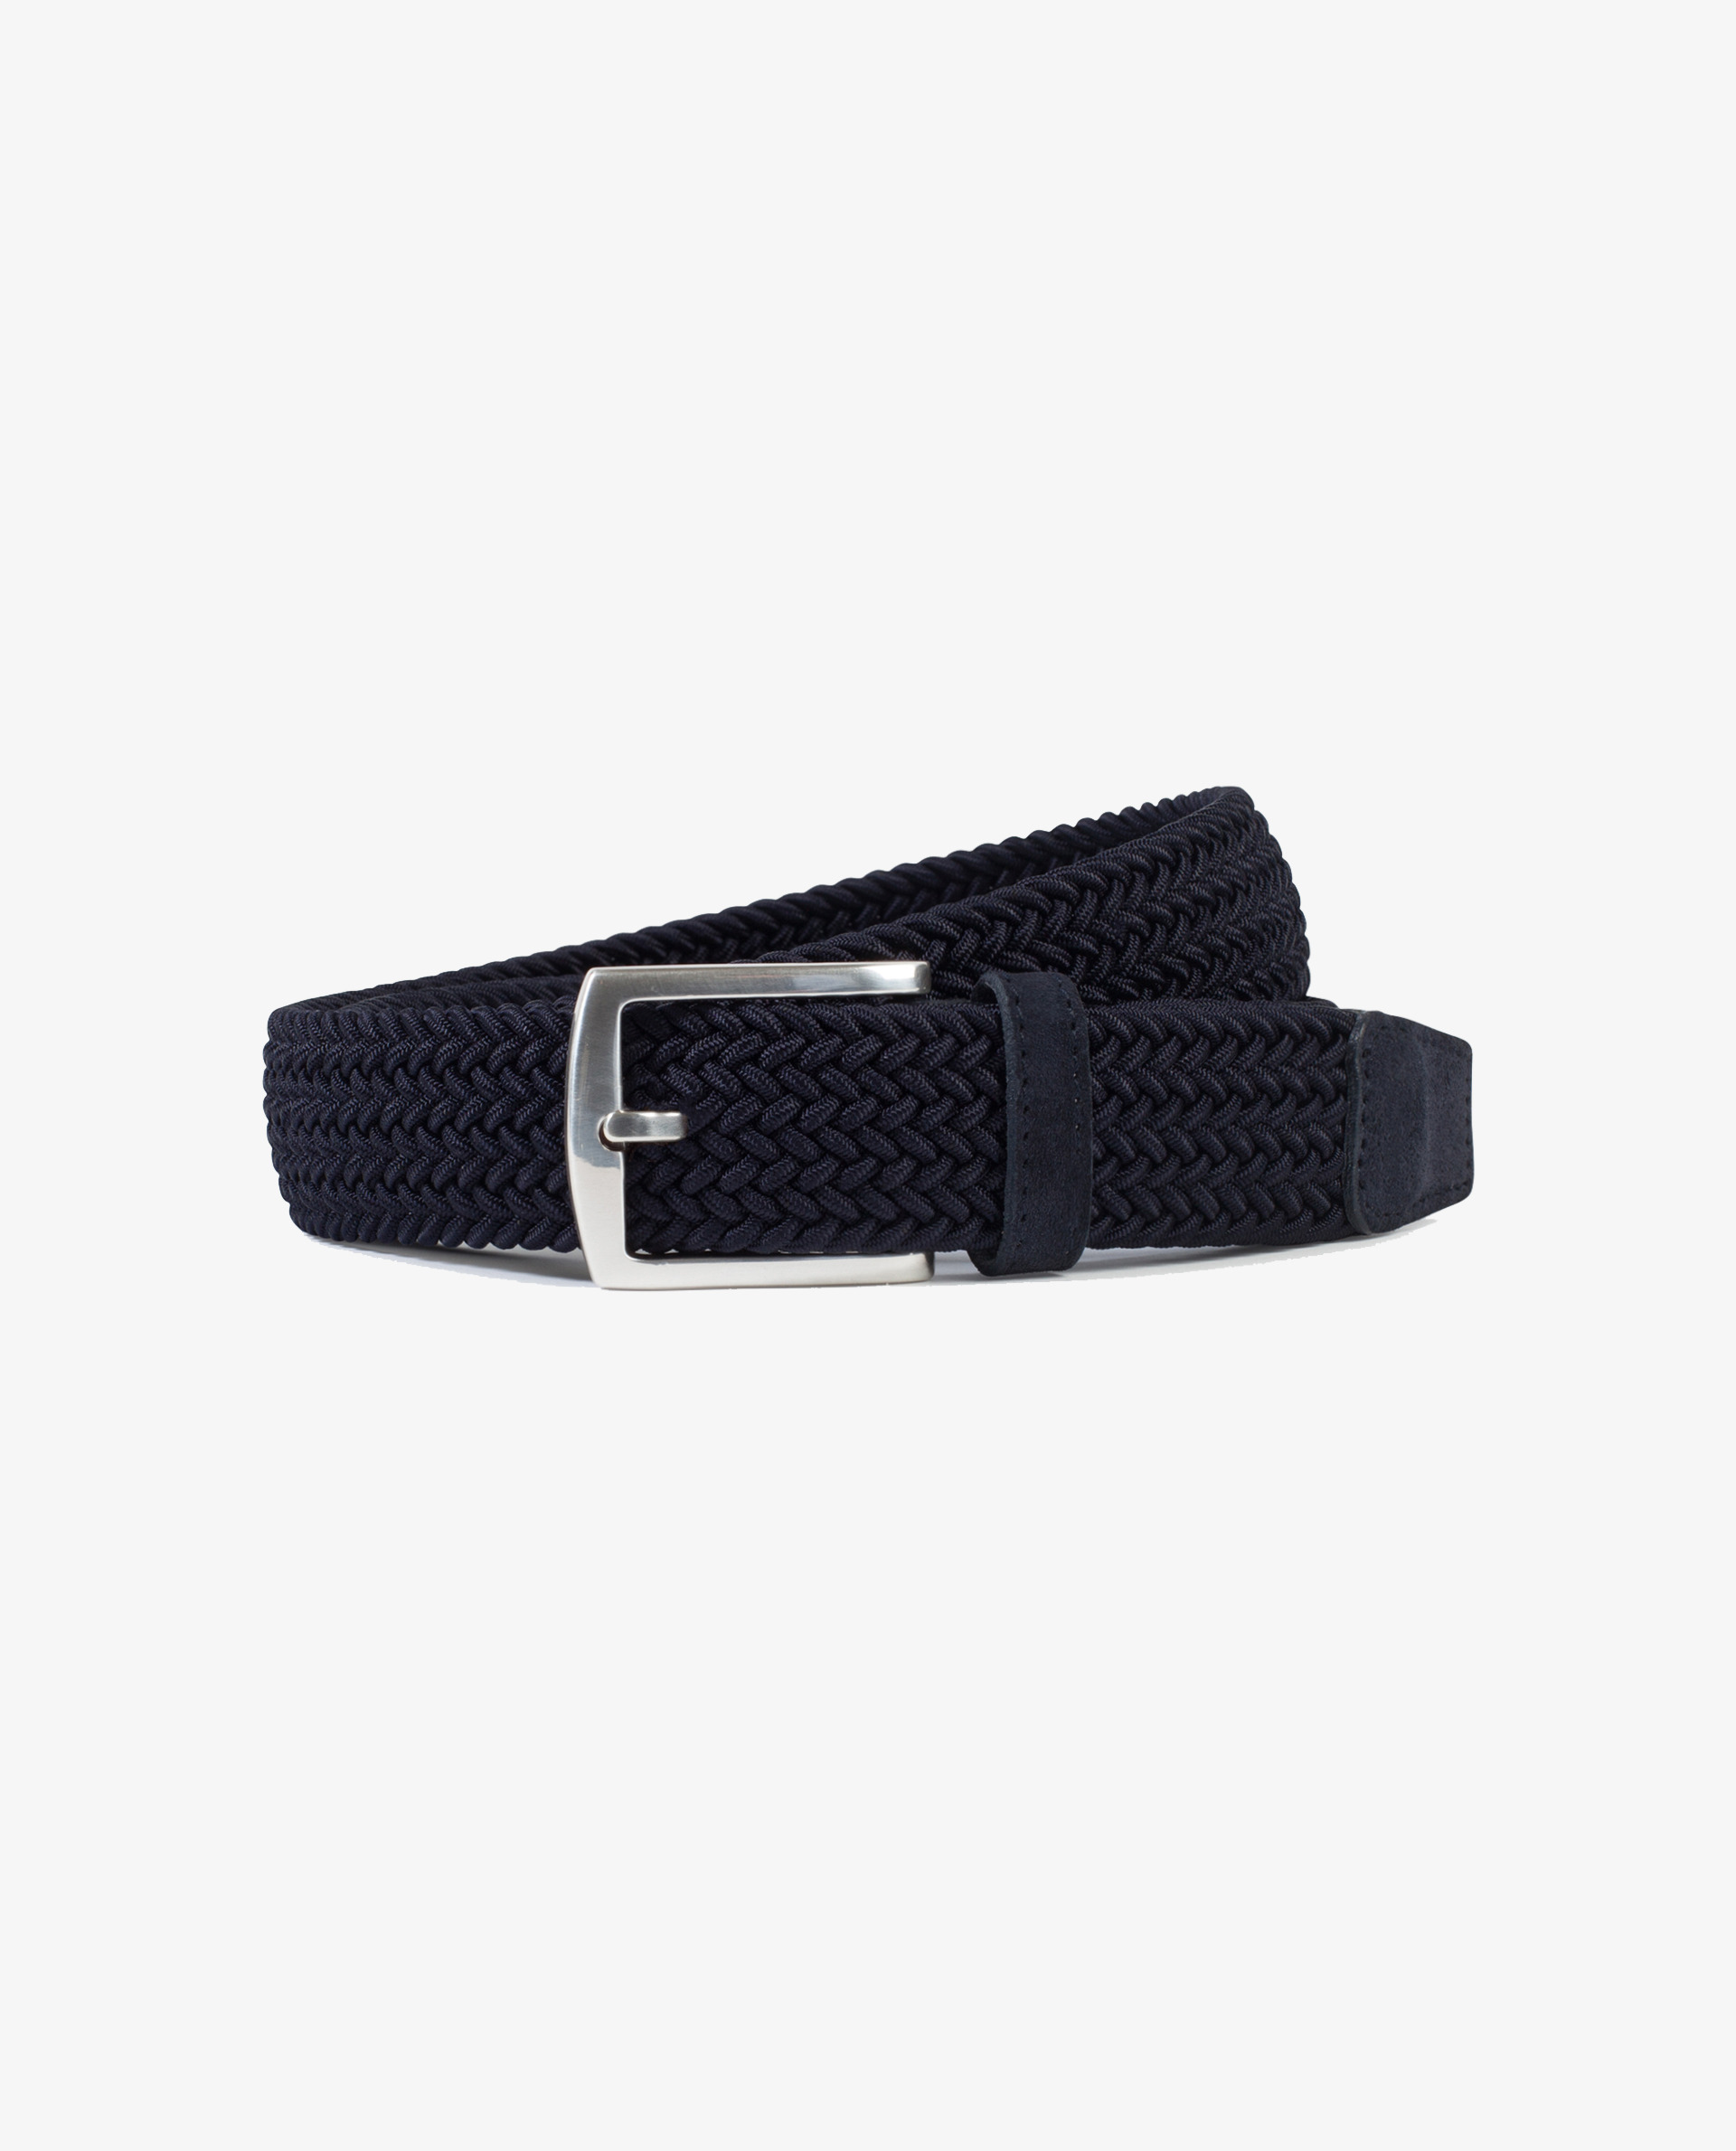 Andrea D'Amico, Braided Belt